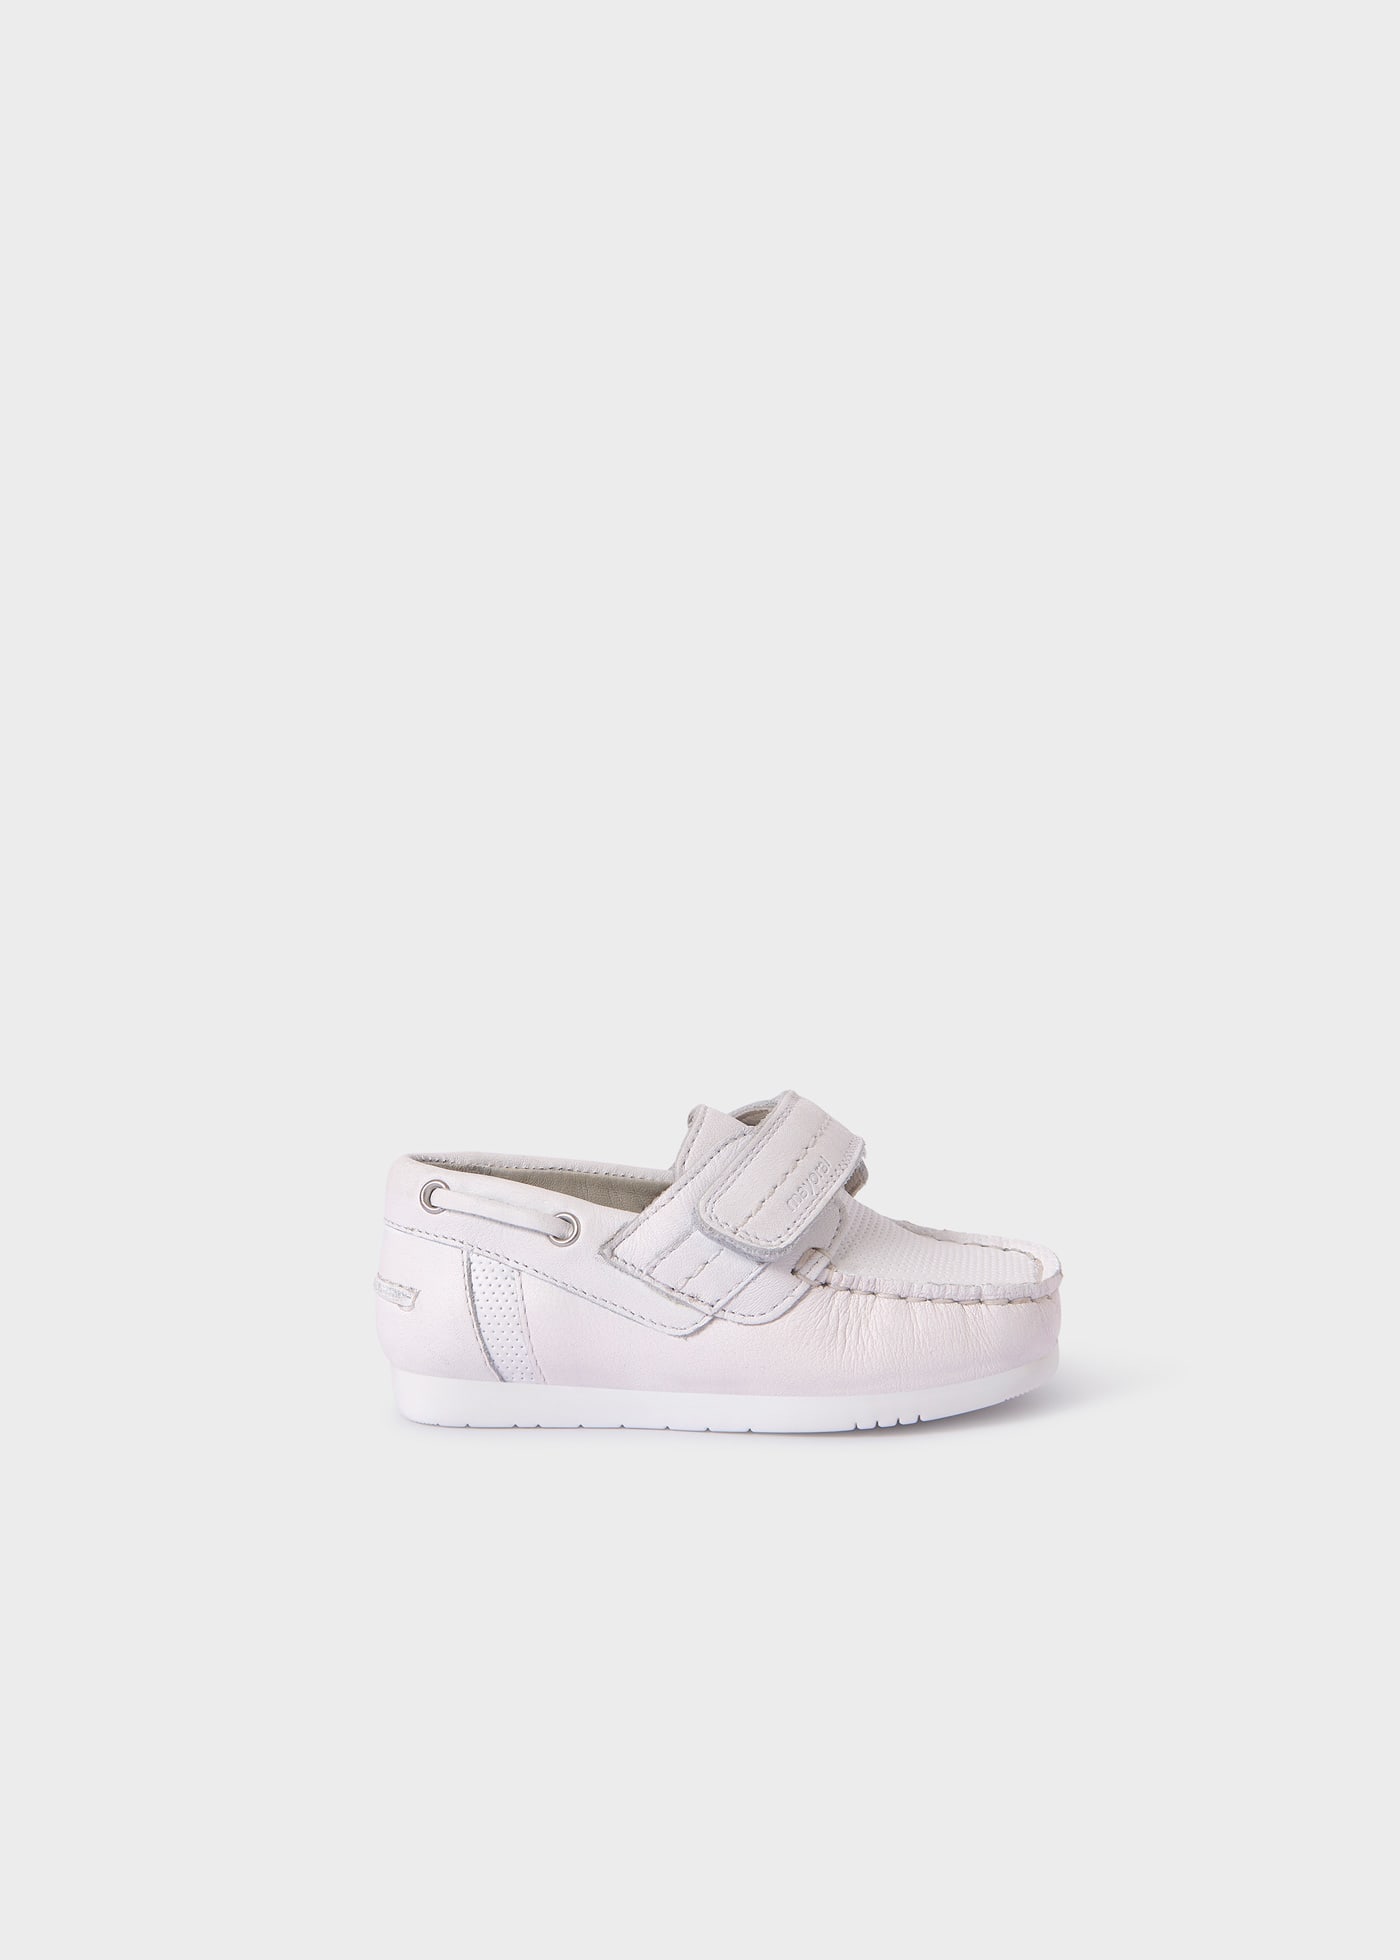 baby leather boat shoes